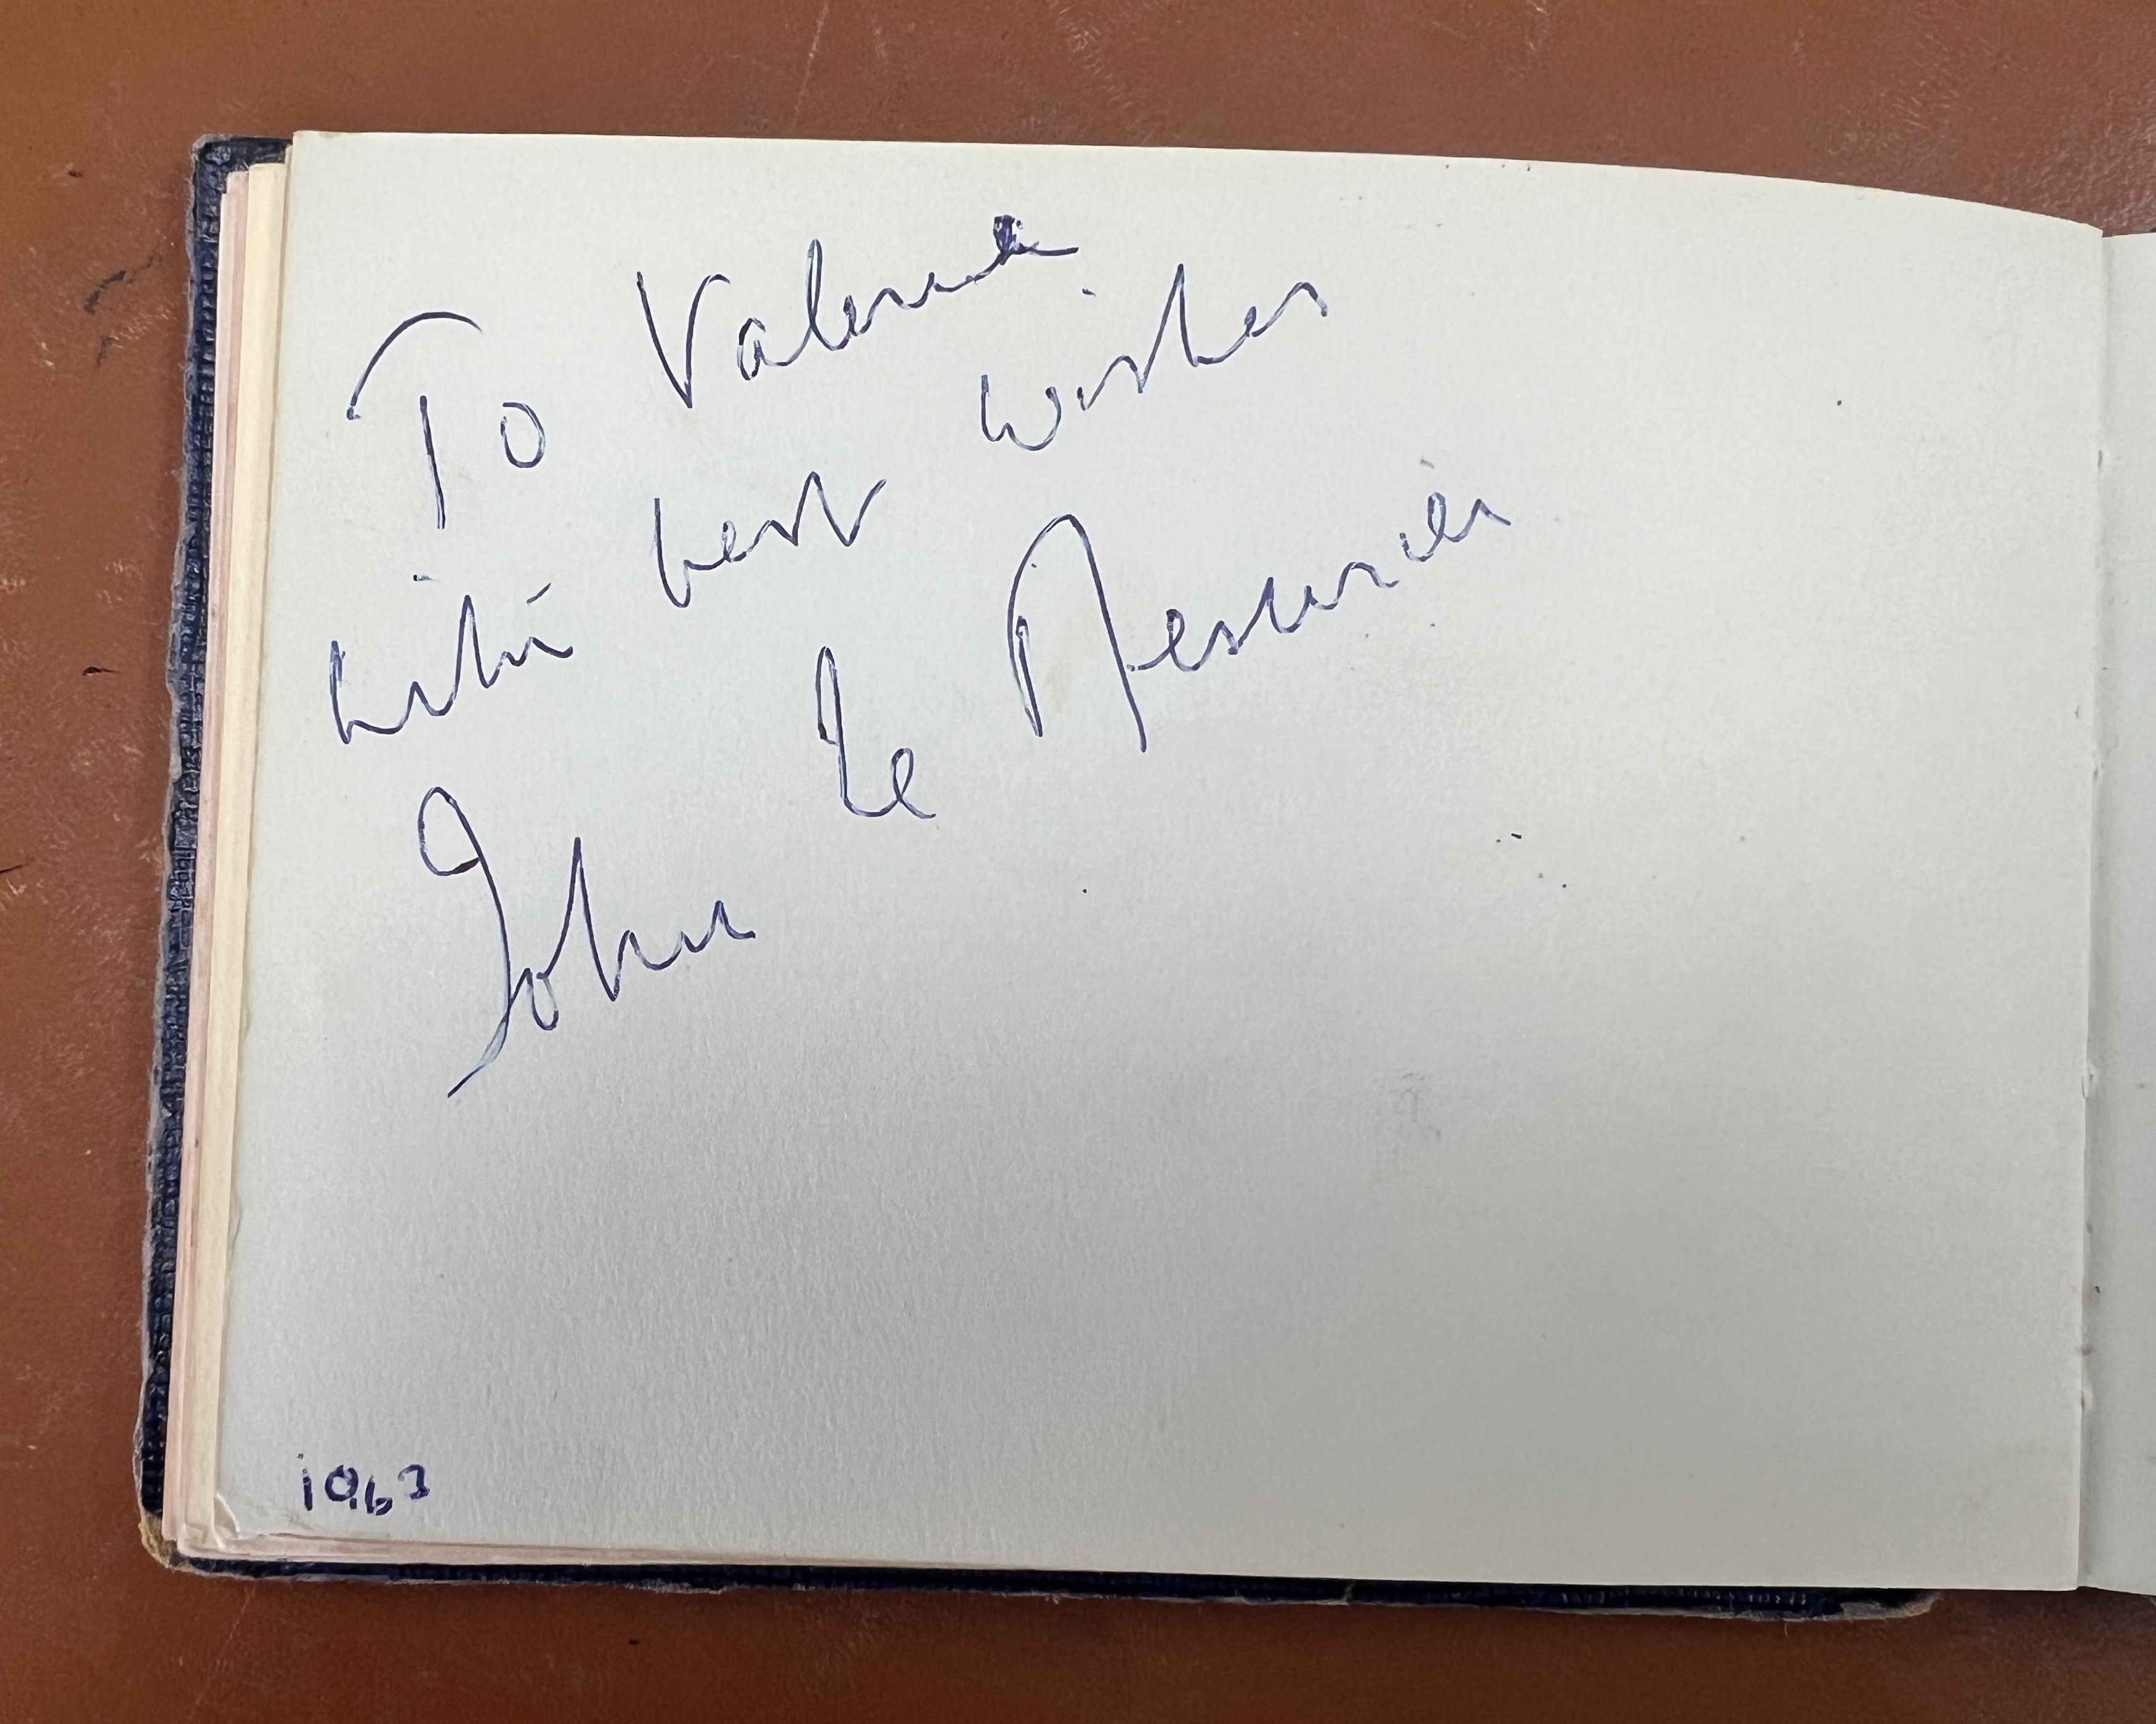 A 1960's autograph album containing autographs of various celebrities including Cliff Richard, - Image 35 of 37